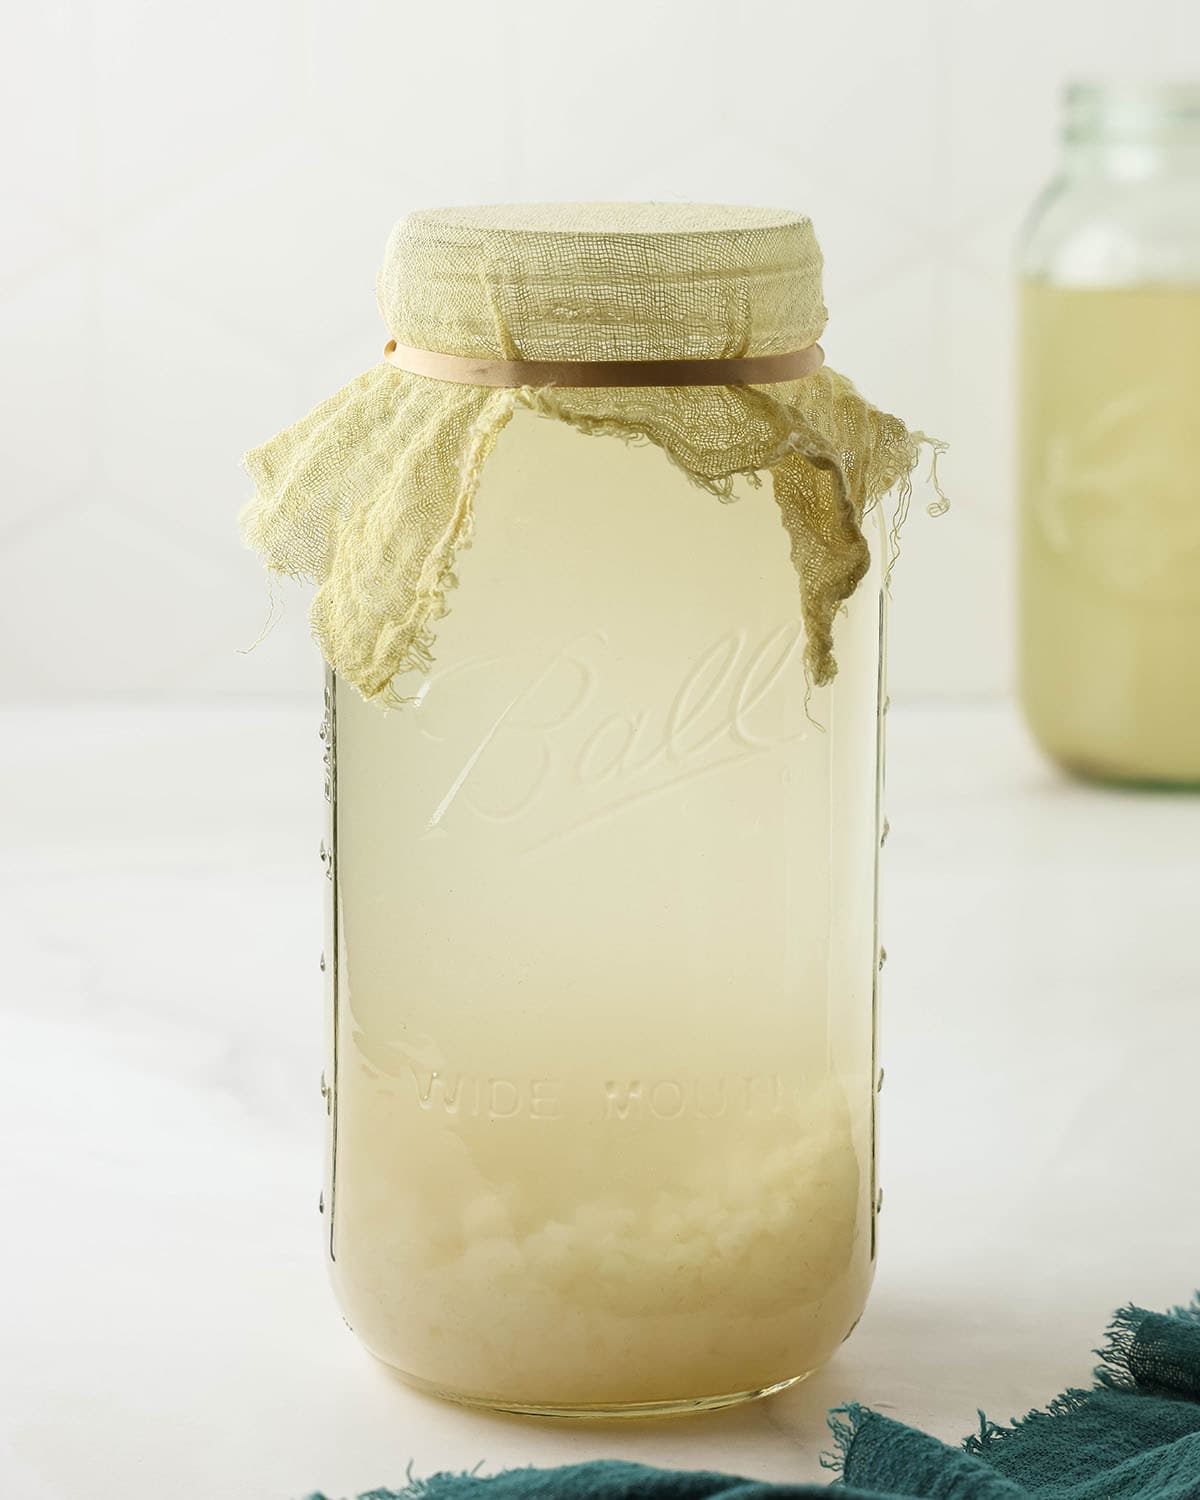 Jar of water kefir with a cheesecloth secured to the top, ready to ferment.